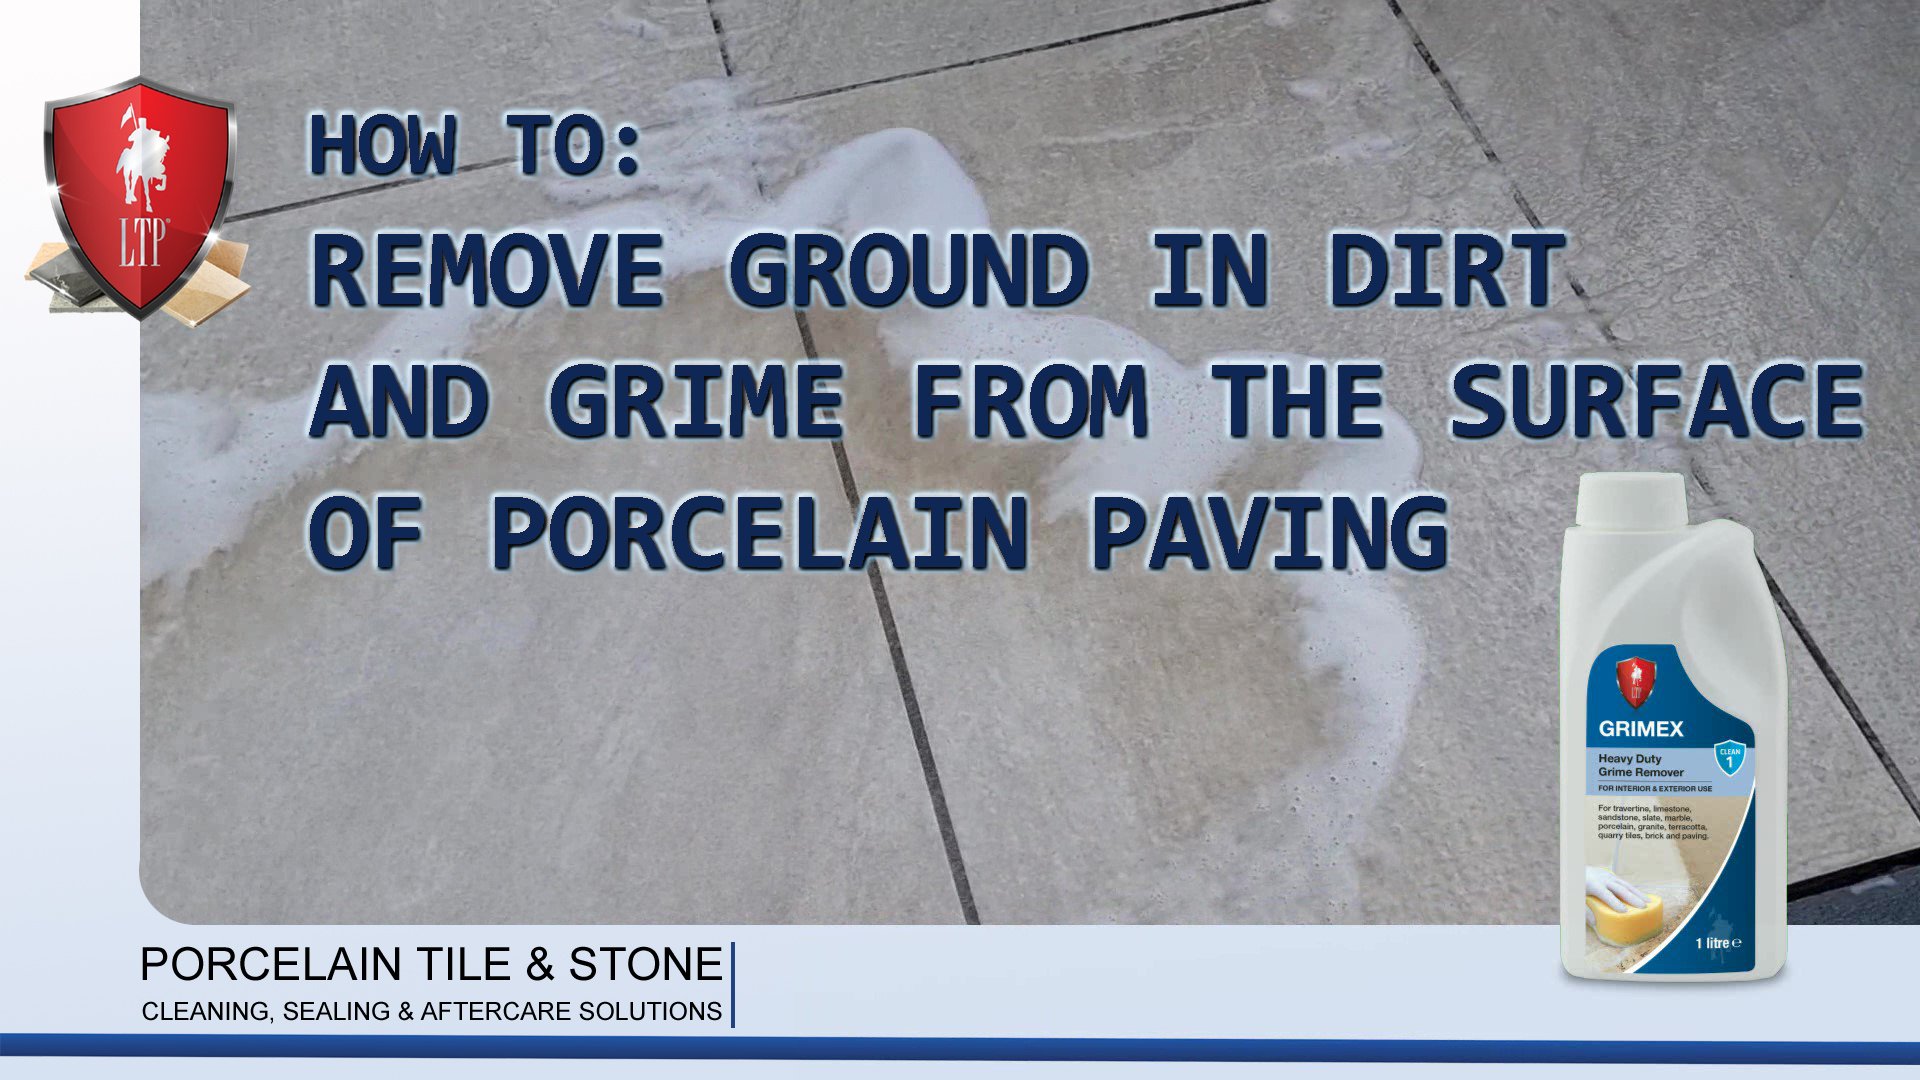 37. How do I remove stubborn dirt and grime from porcelain paving_2022_Thumbnail.jpg